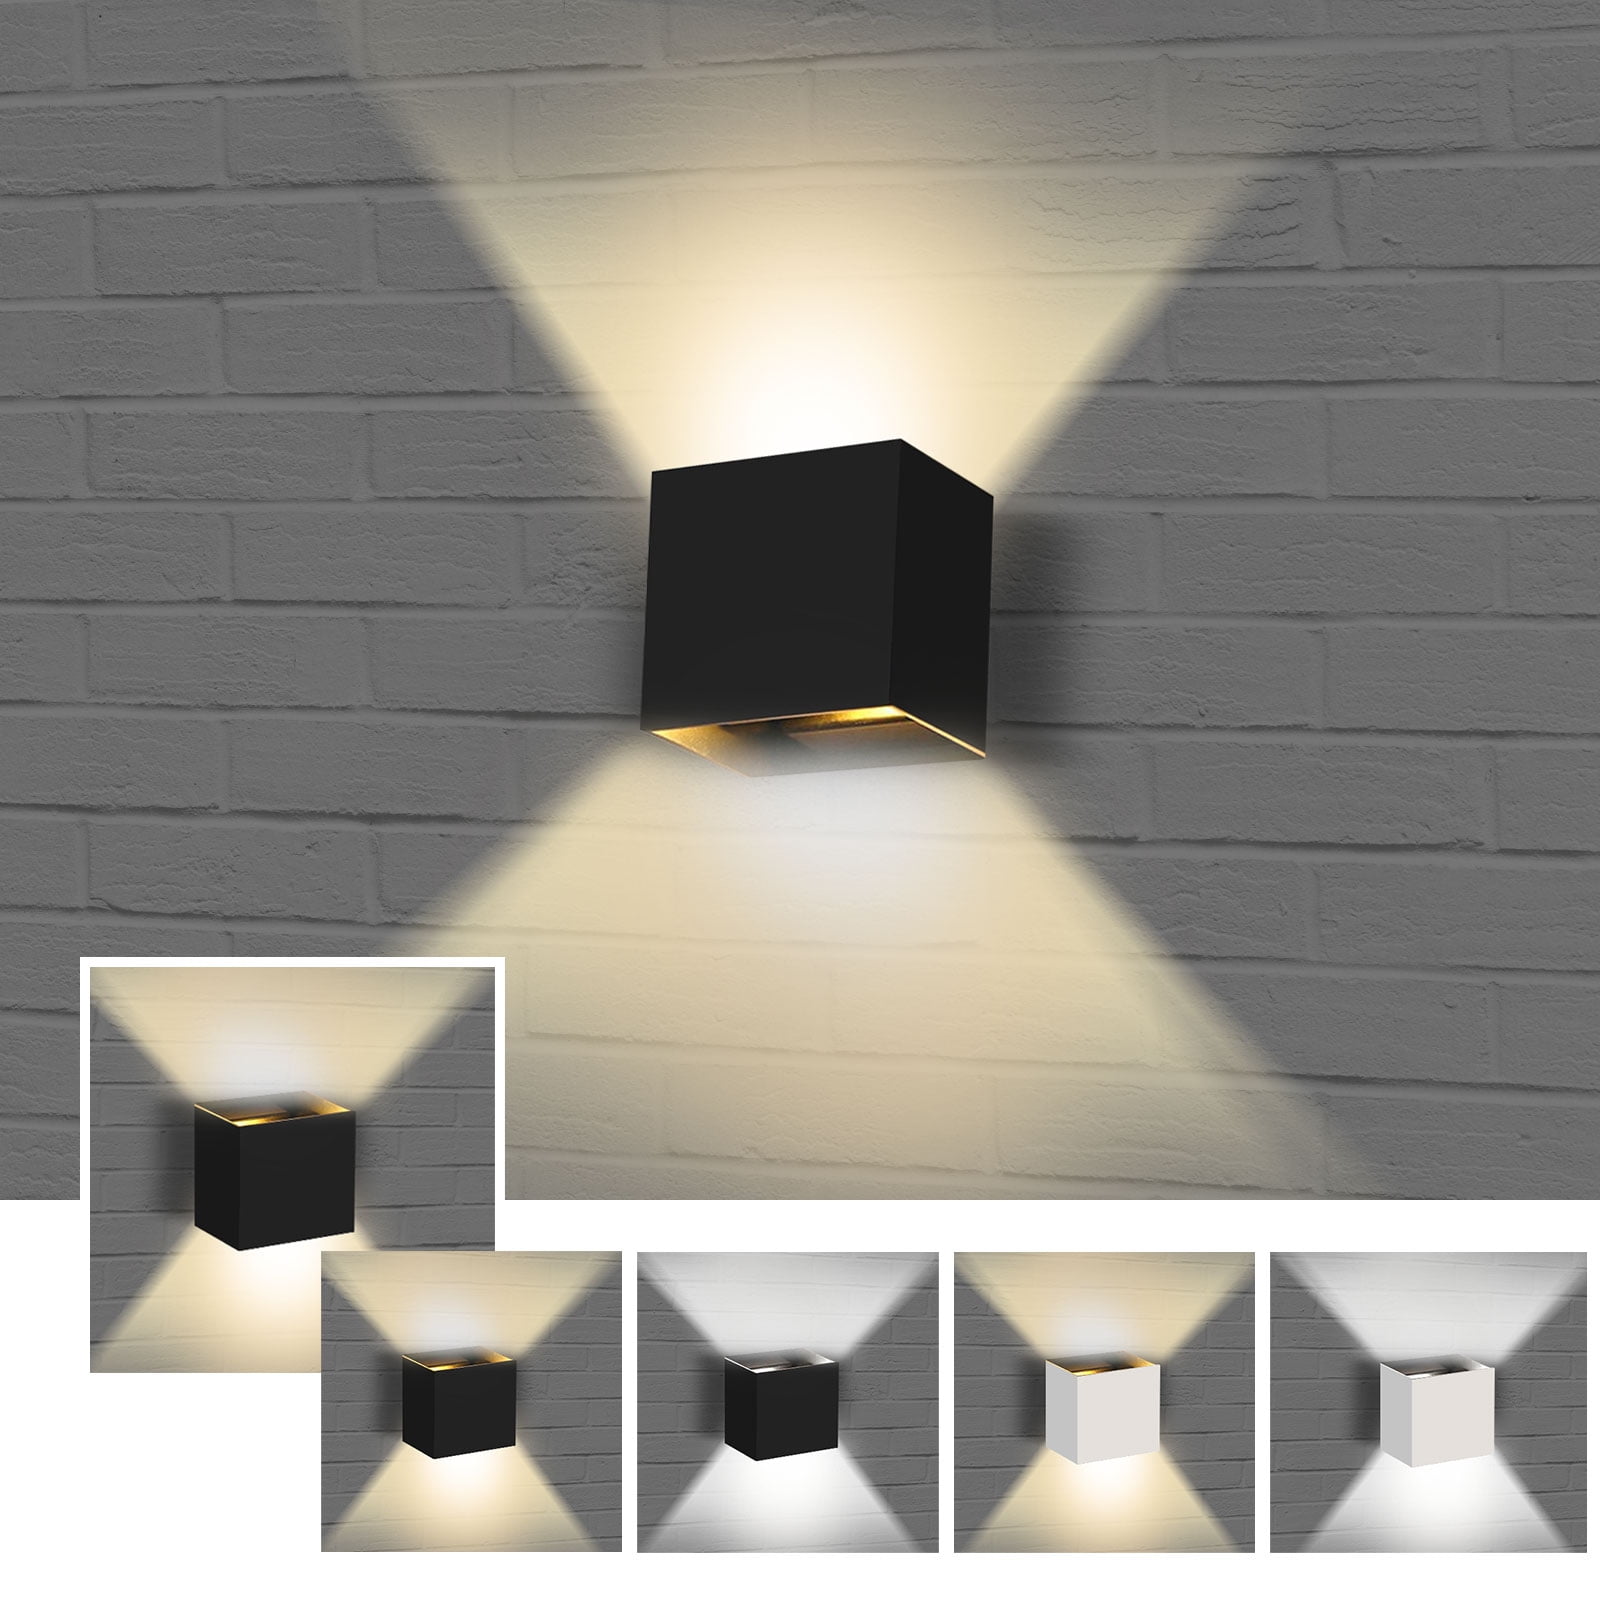 Torch Lamps Wall-Mounted Sconce Light Home Hallway Night Lighting-3 Available 